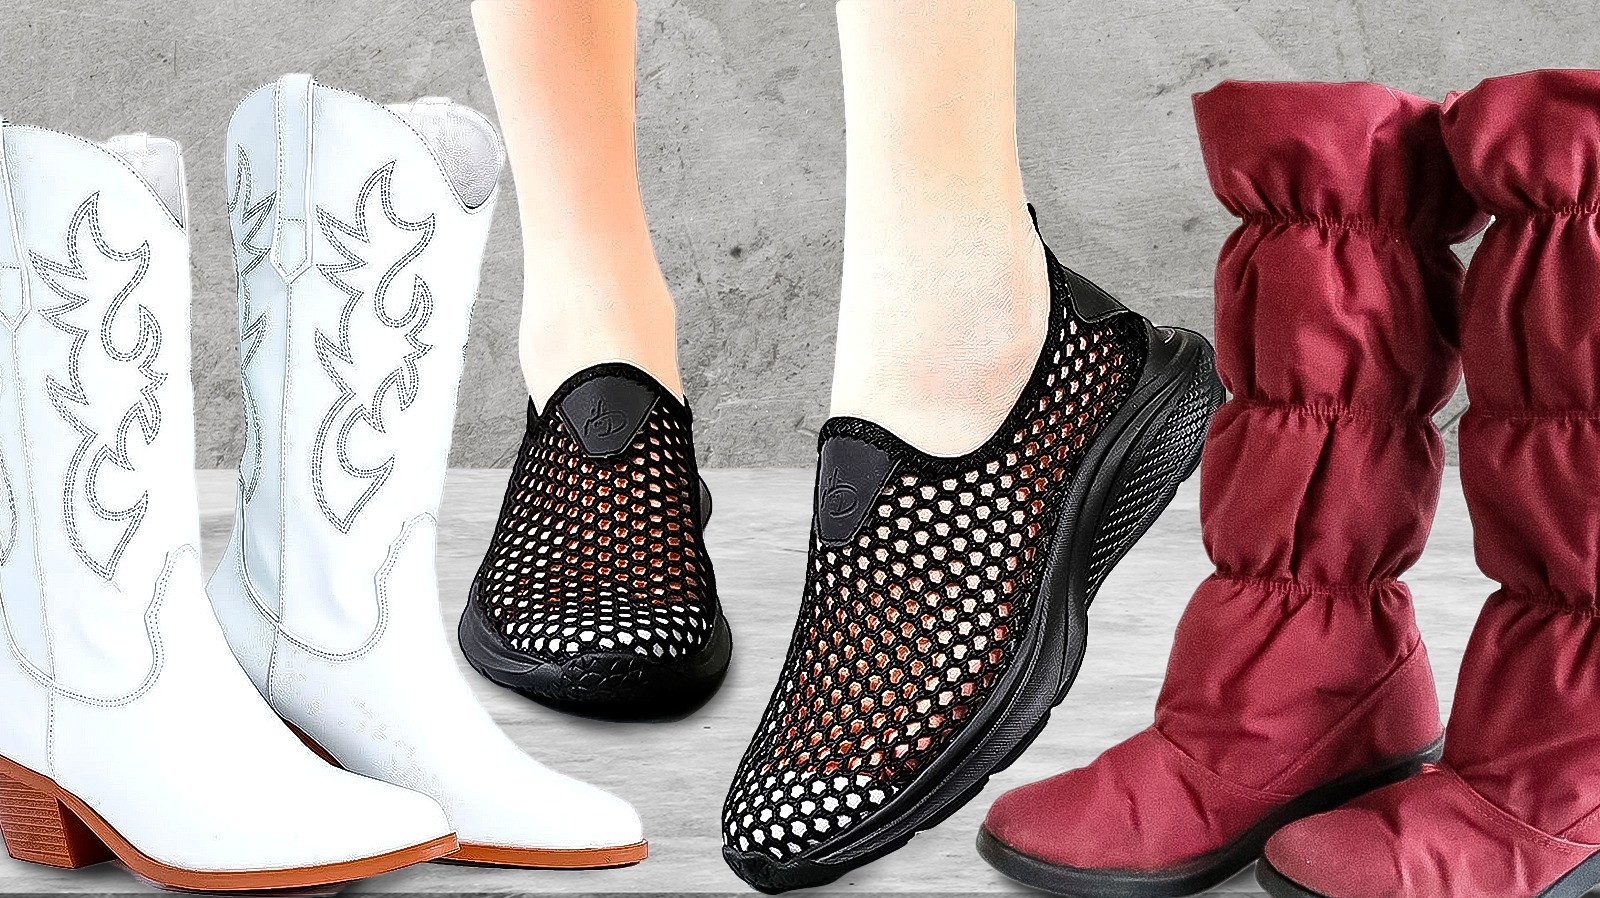 Women's Fall Shoe Trends 2023: Experts Predict What's Hot & Popular